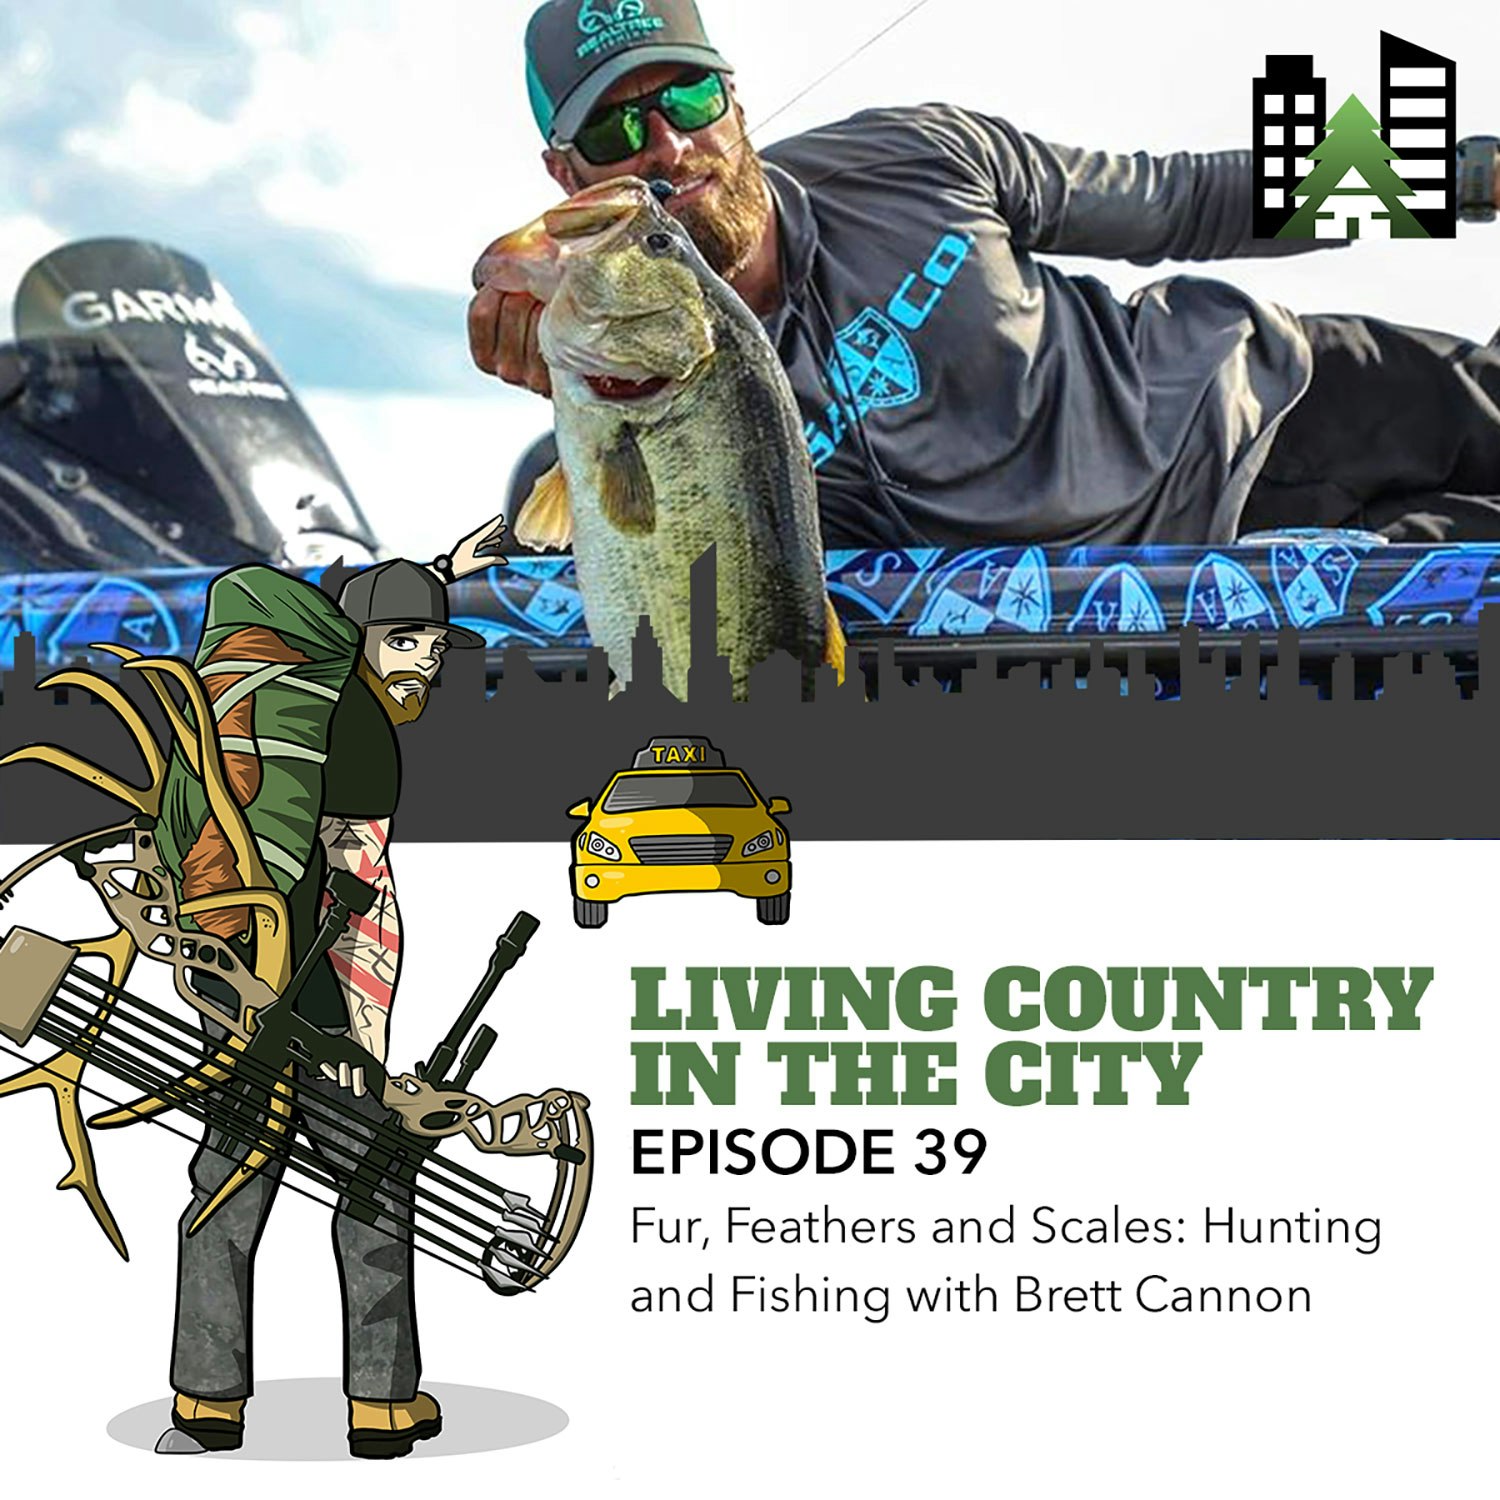 Ep 39 - Fur, Feathers and Scales: Hunting and Fishing with Brett Cannon